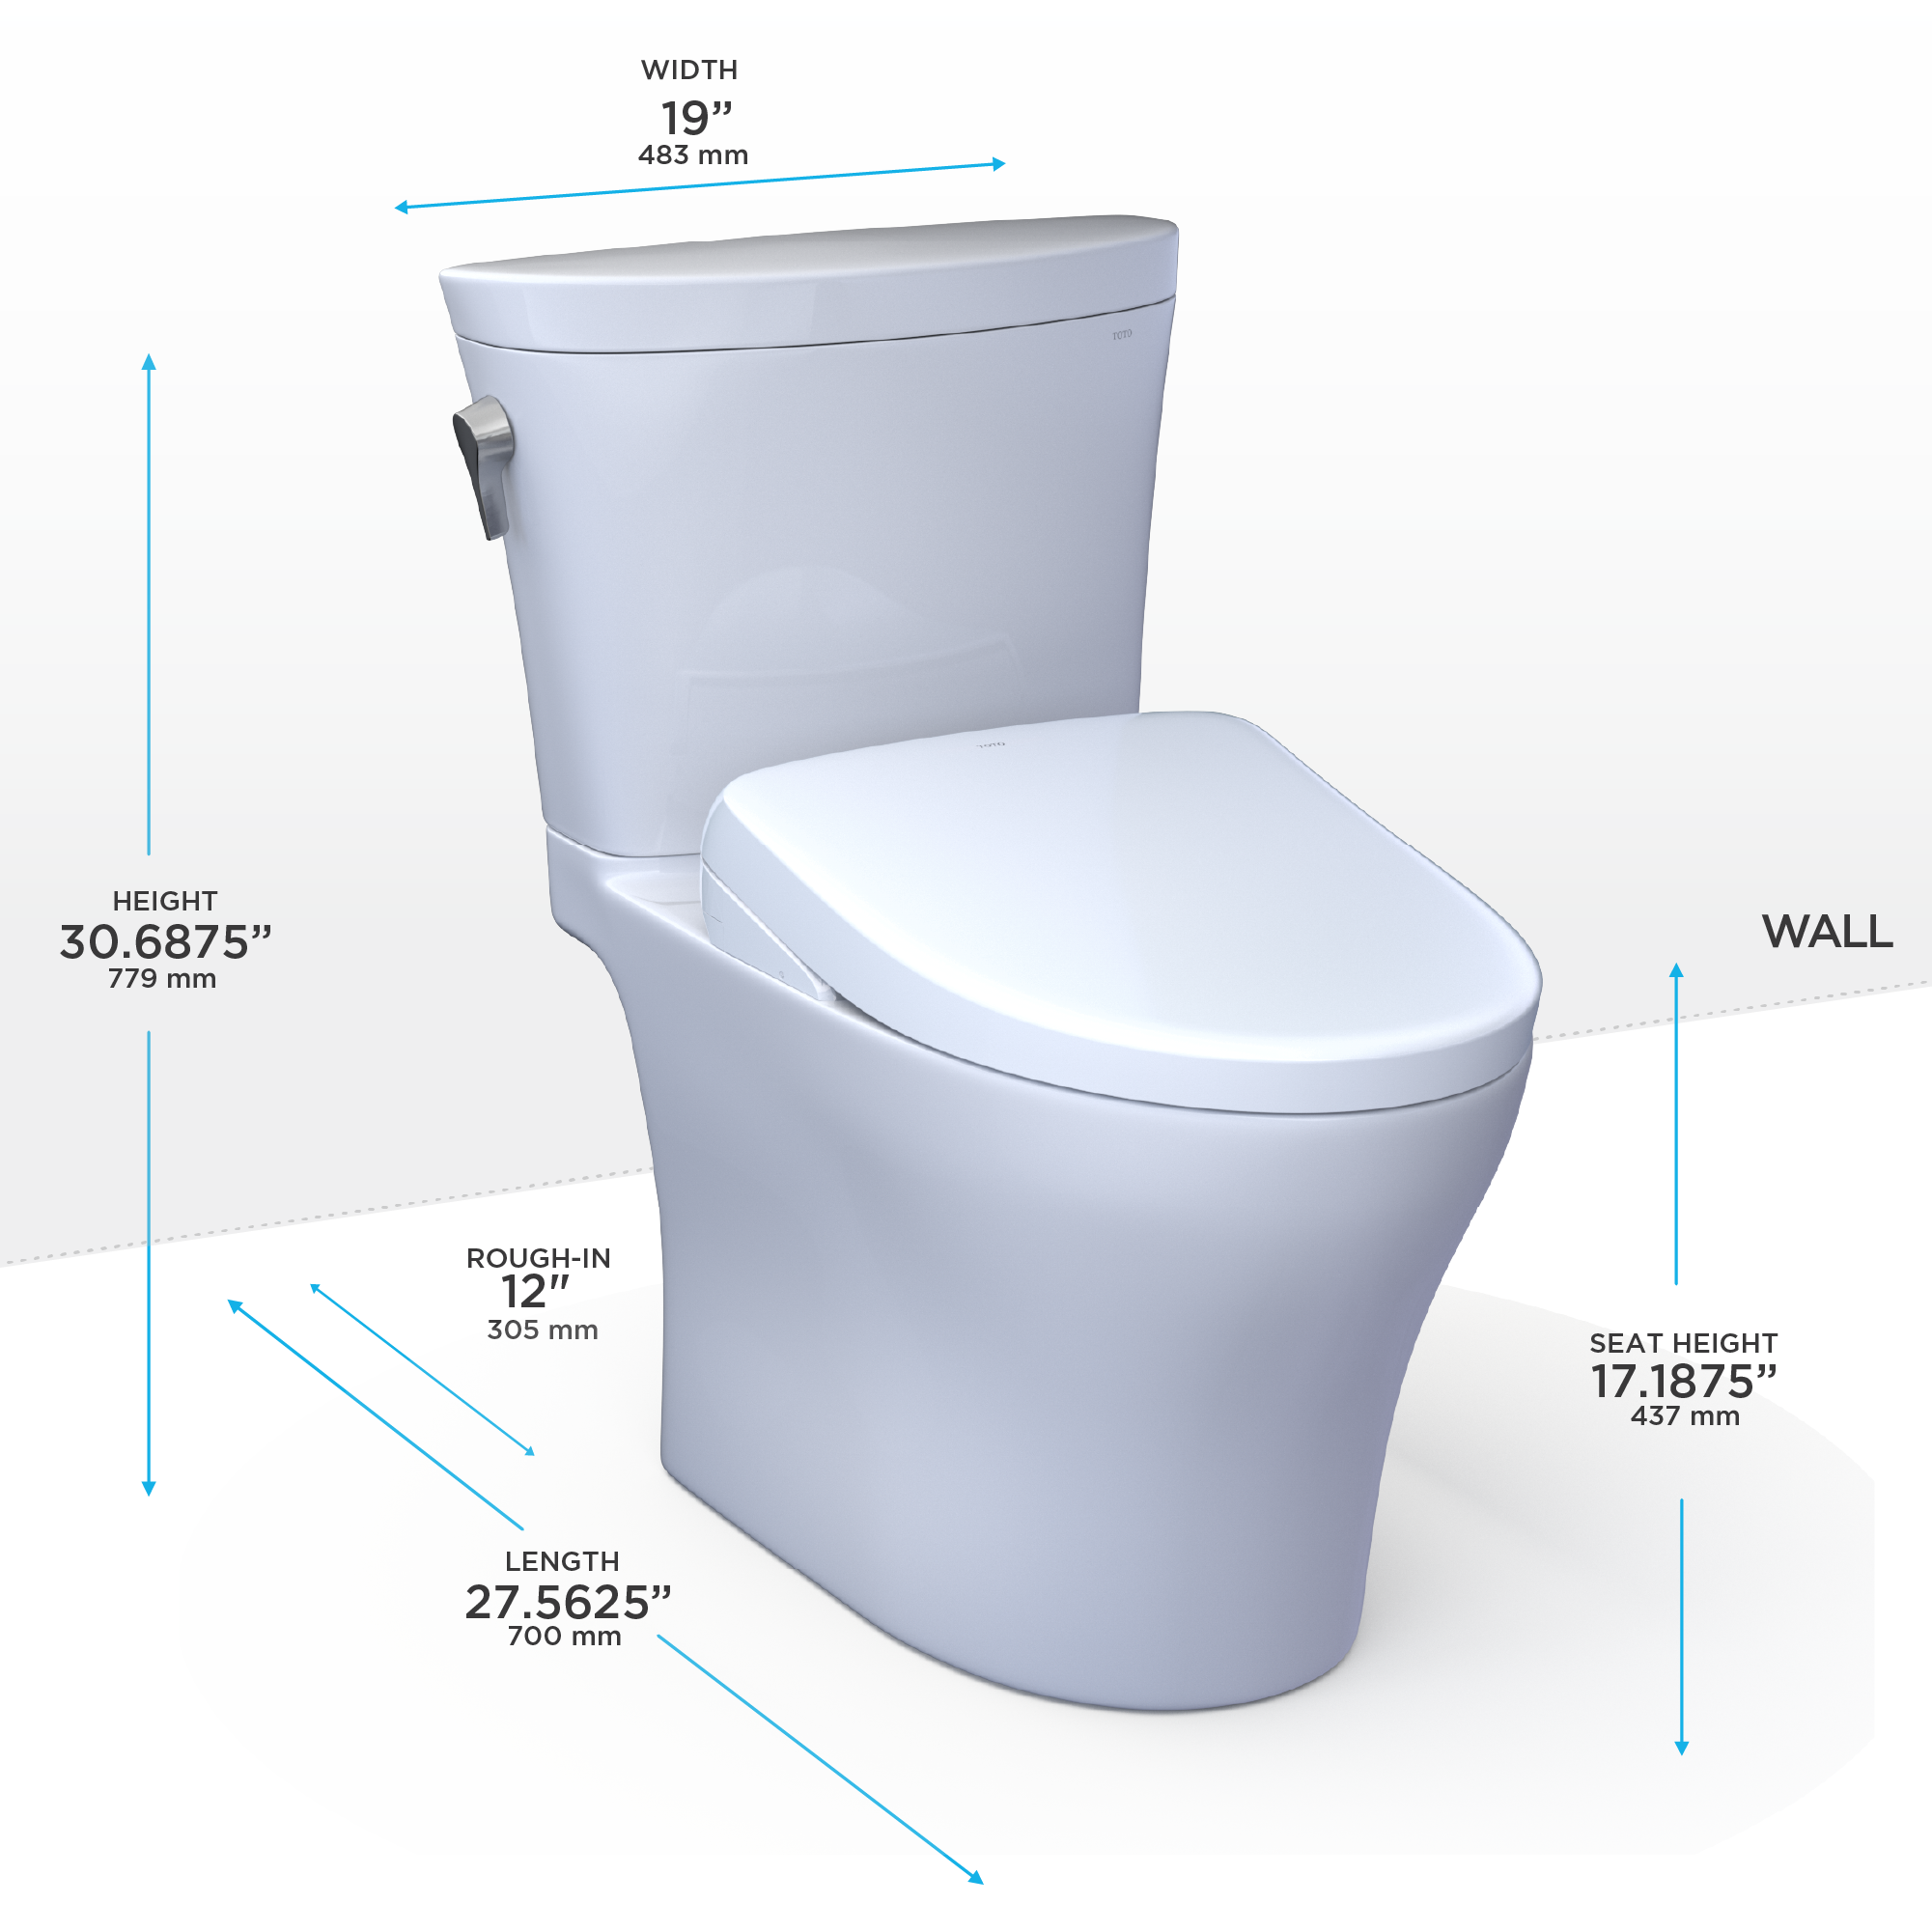 TOTO WASHLET+ Aquia IV Arc Two-Piece Elongated Dual Flush 1.28 and 0.9 GPF Toilet with S7A Contemporary Bidet Seat, Cotton White - MW4484736CEMFGN#01, MW4484736CEMFGNA#01